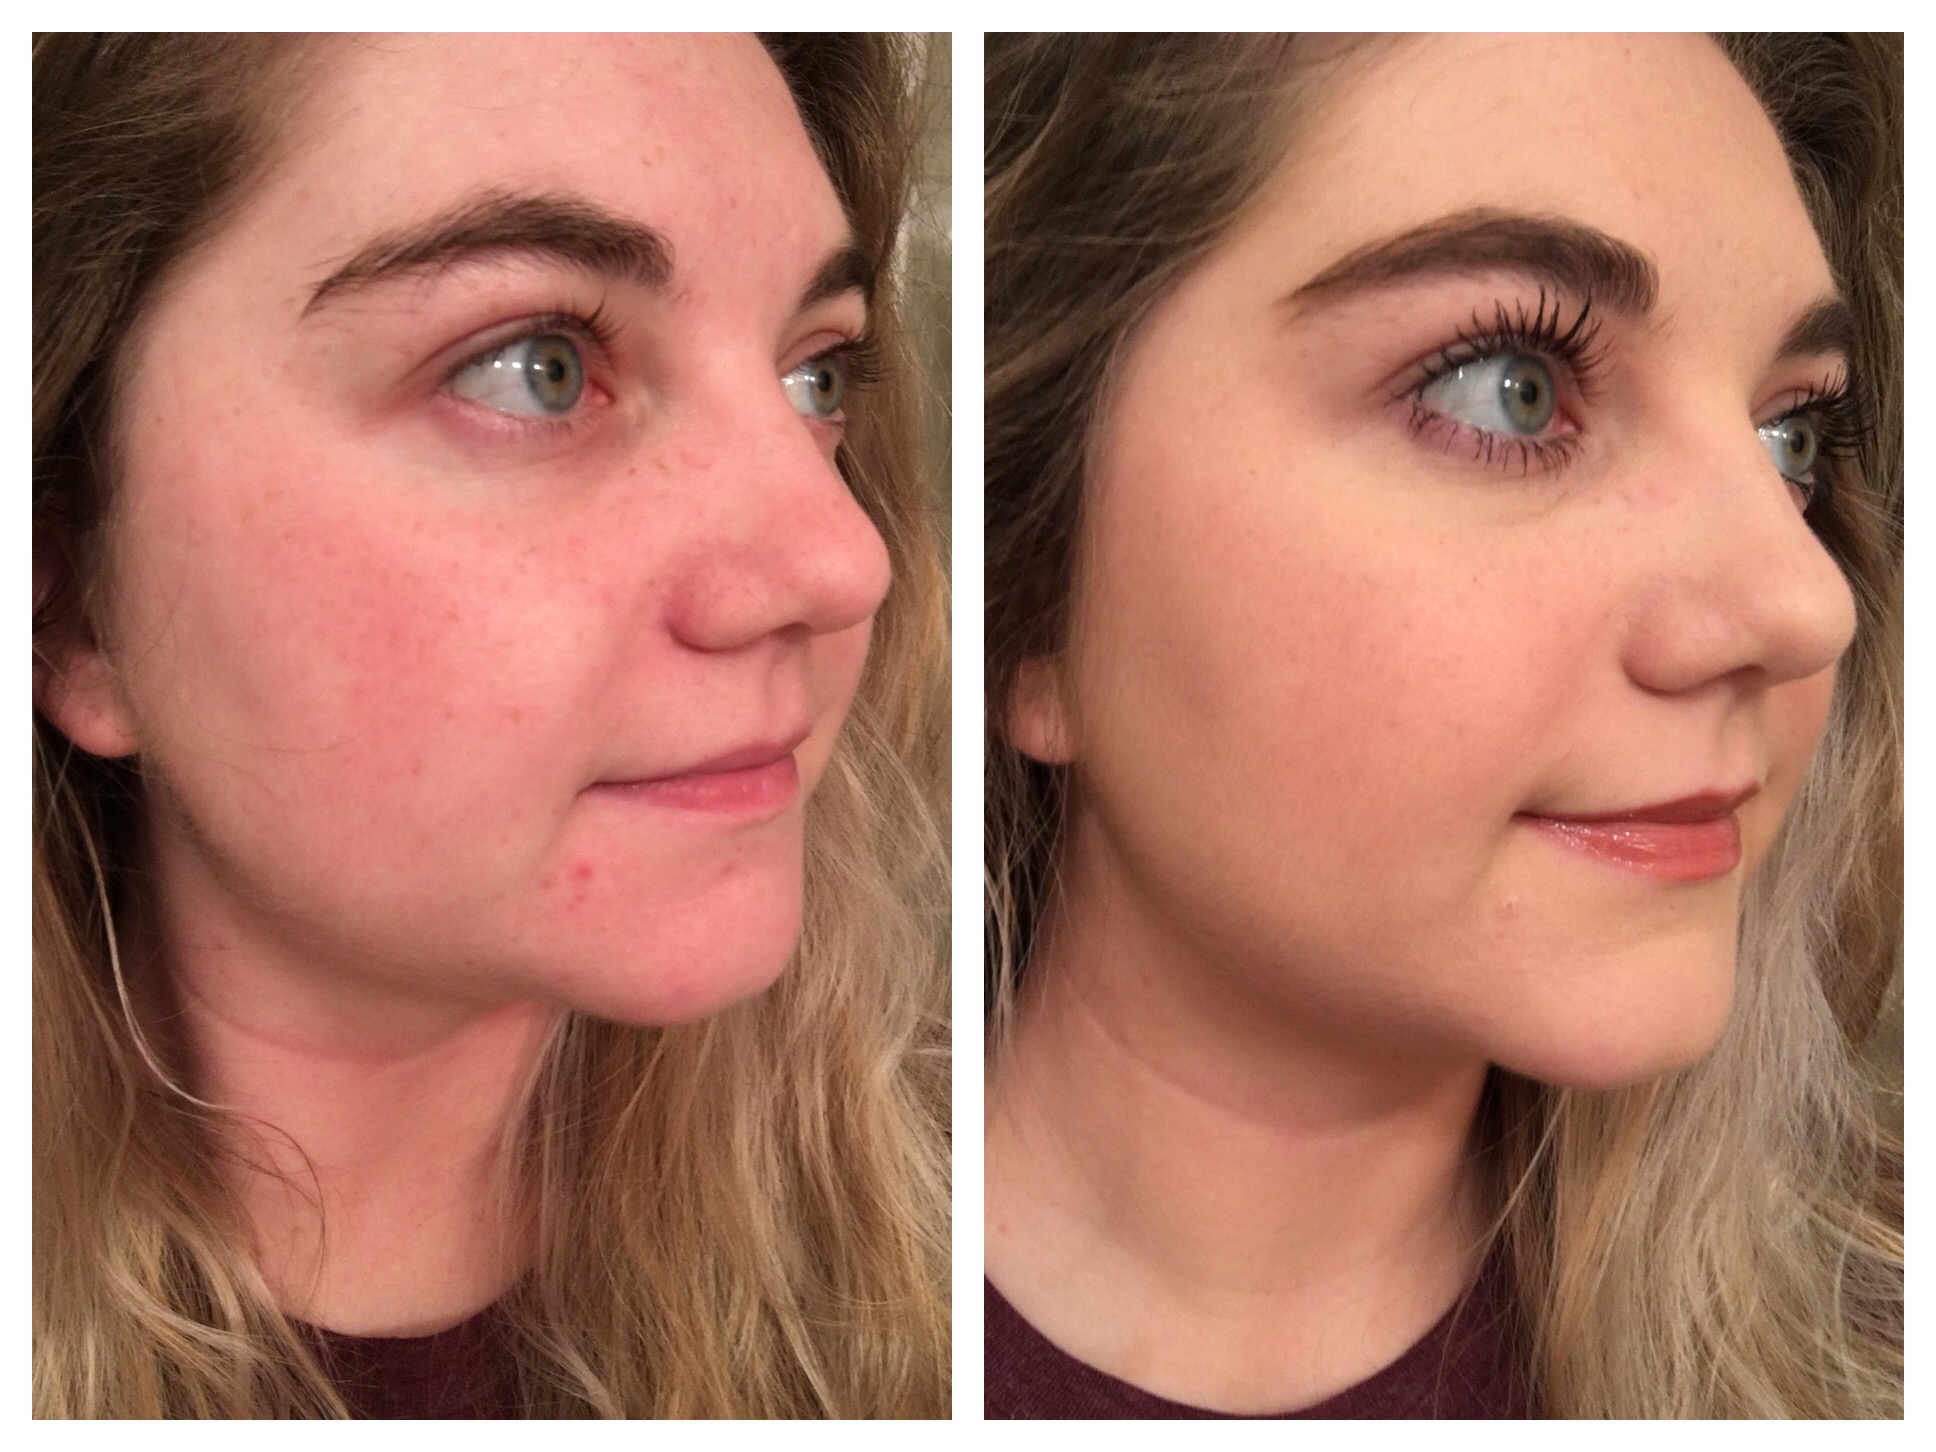 color correcting concealer before or after foundation